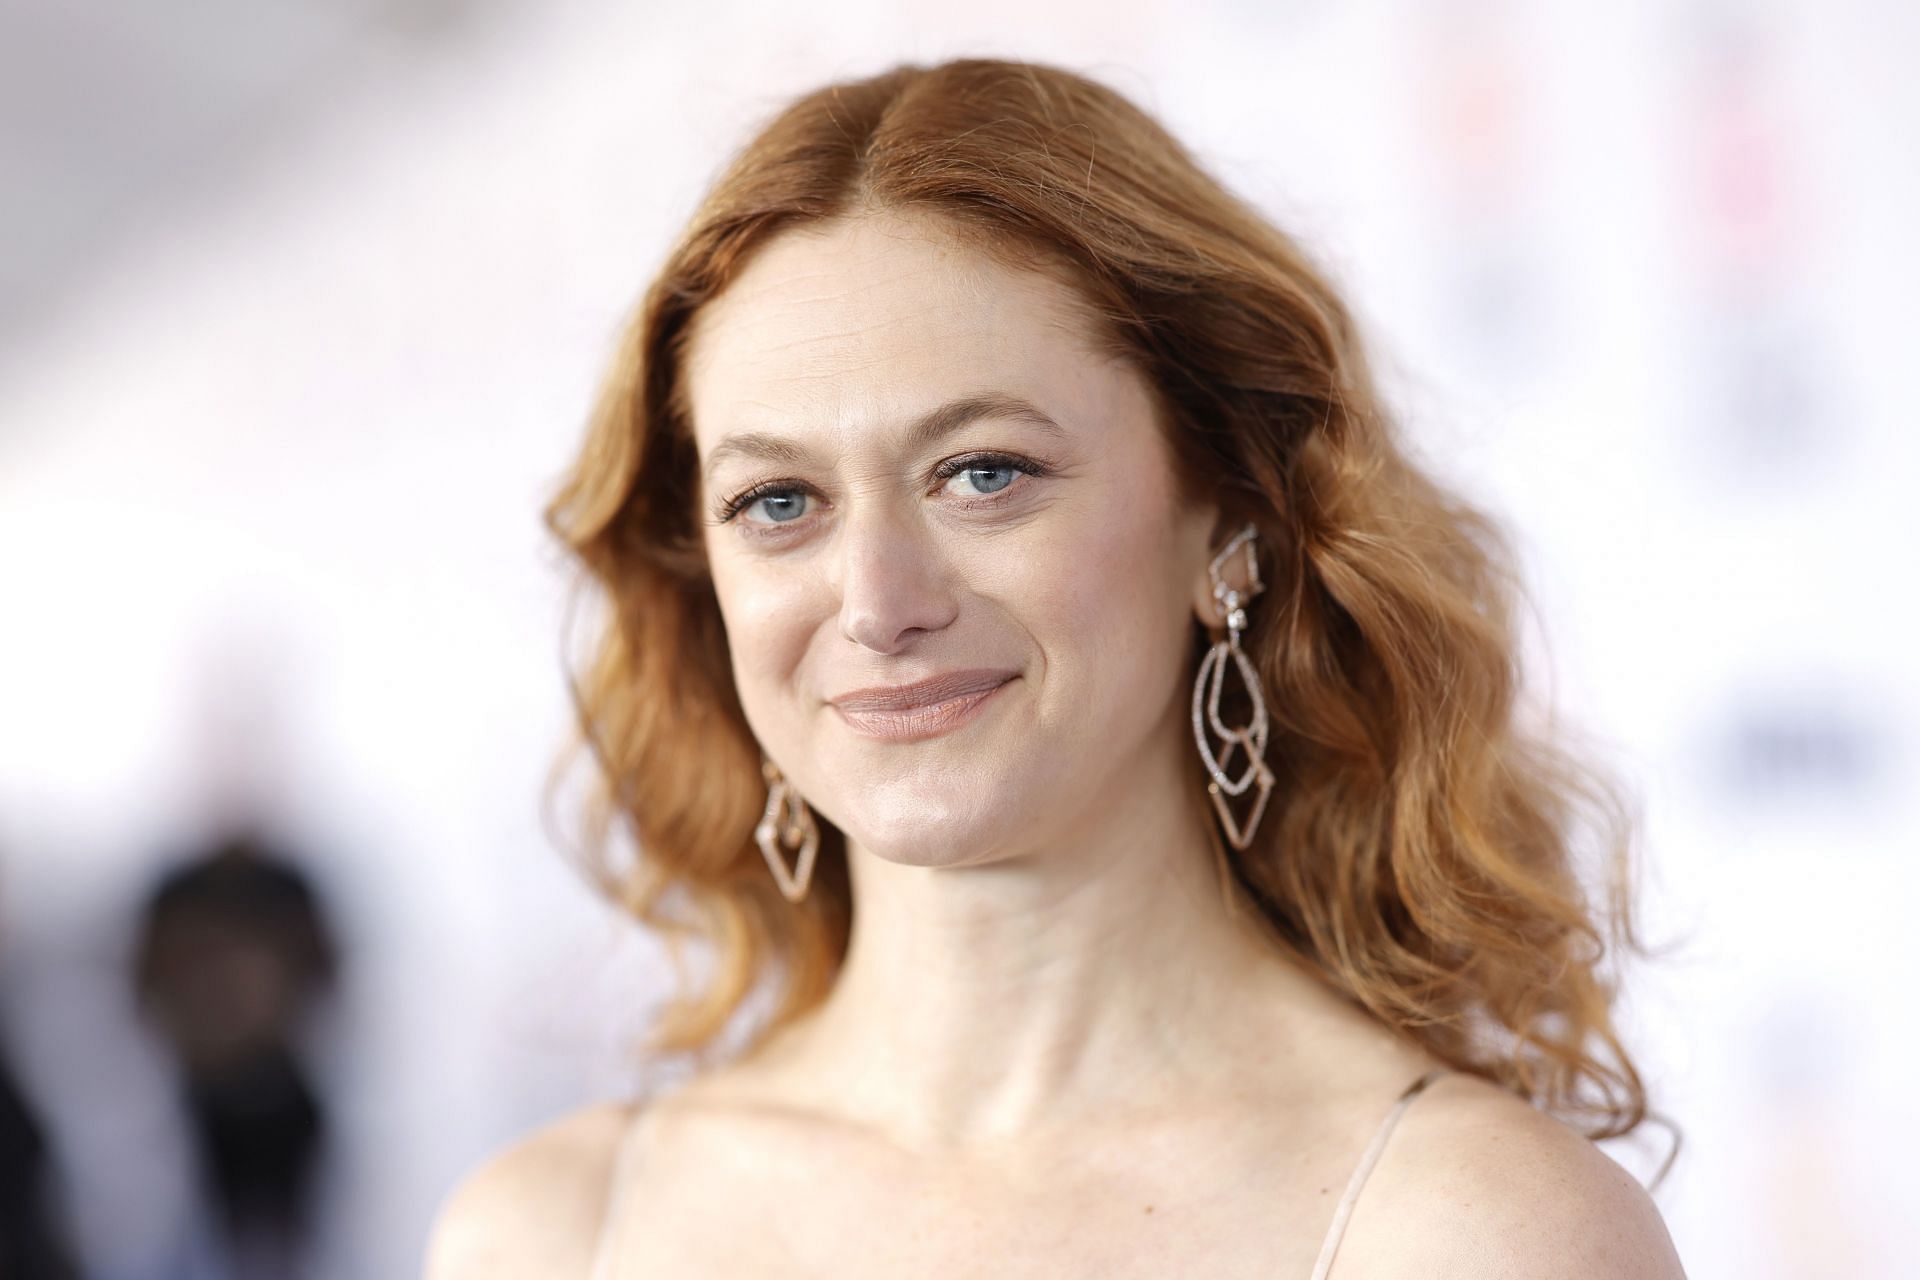 Marin Ireland as Madelin Whitman (Photo by Frazer Harrison/Getty Images)